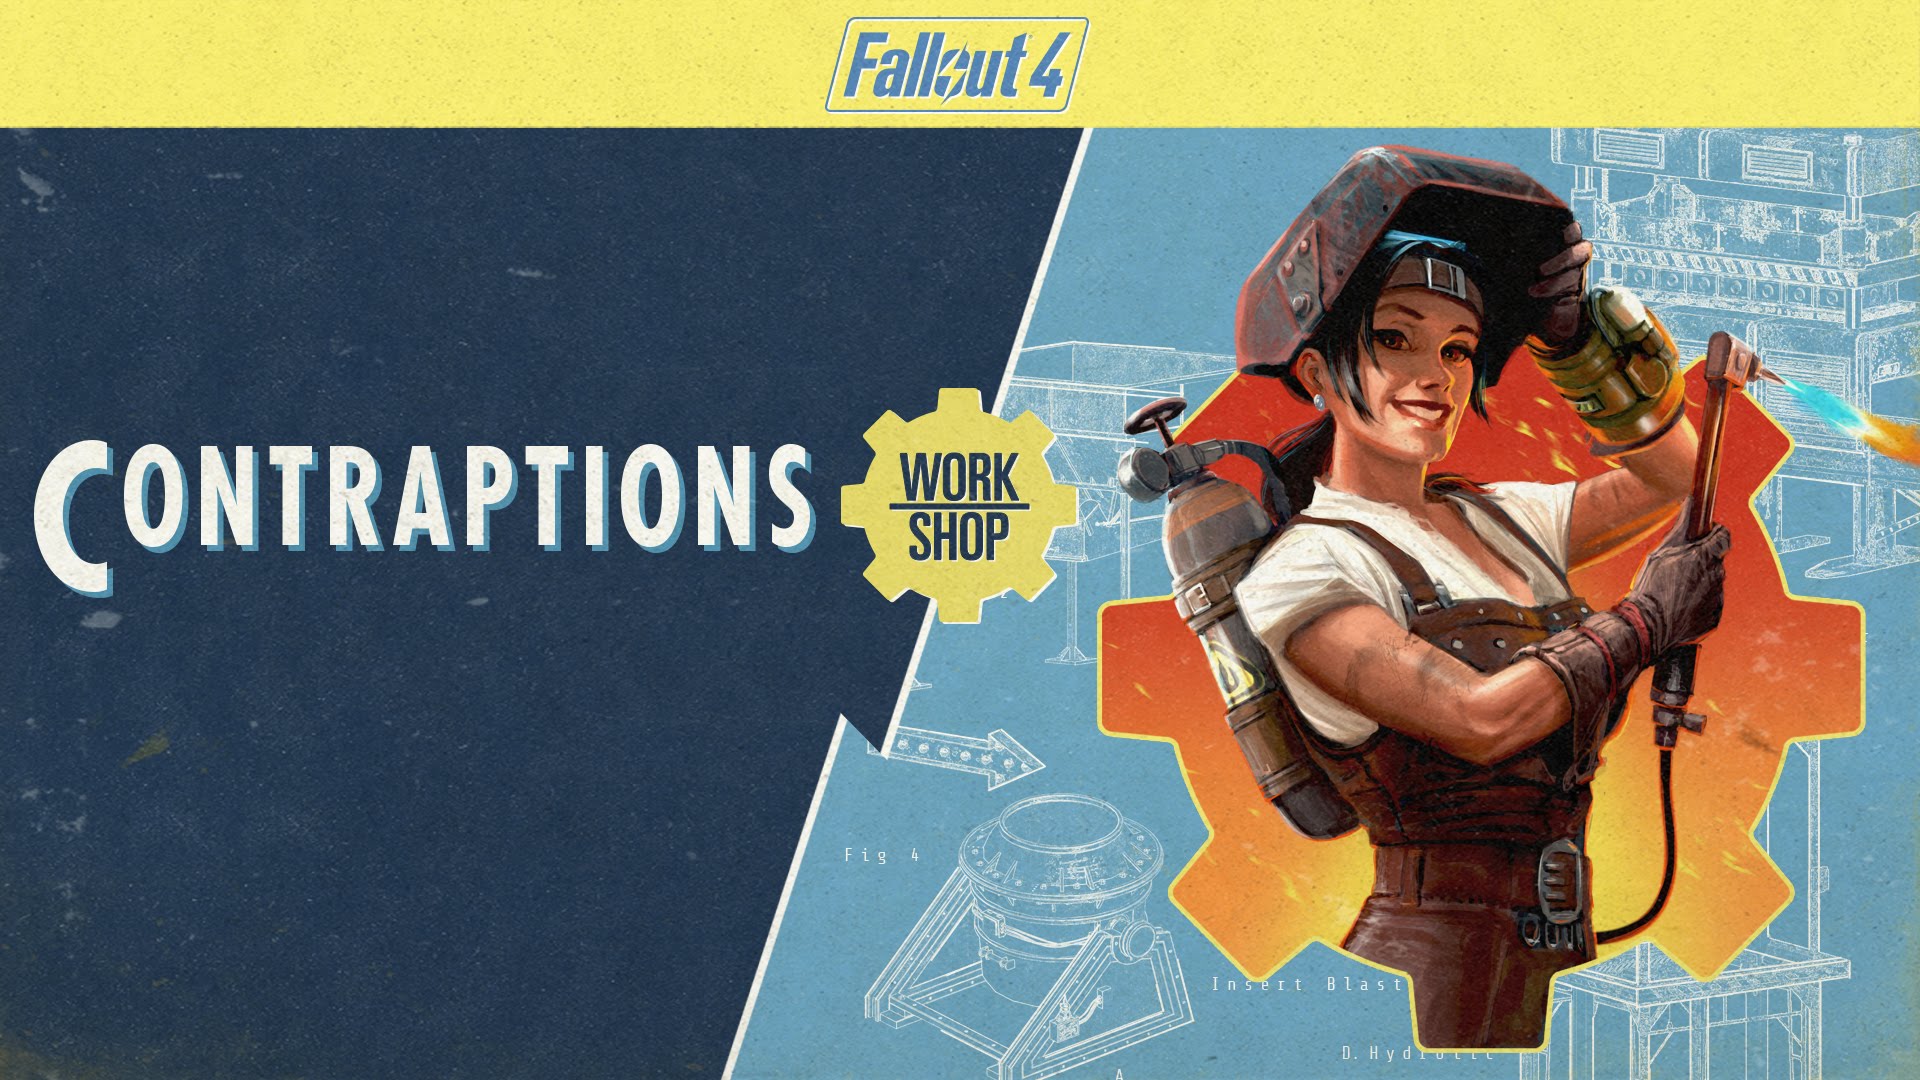 Settlement supplies expanded для fallout 4 фото 83